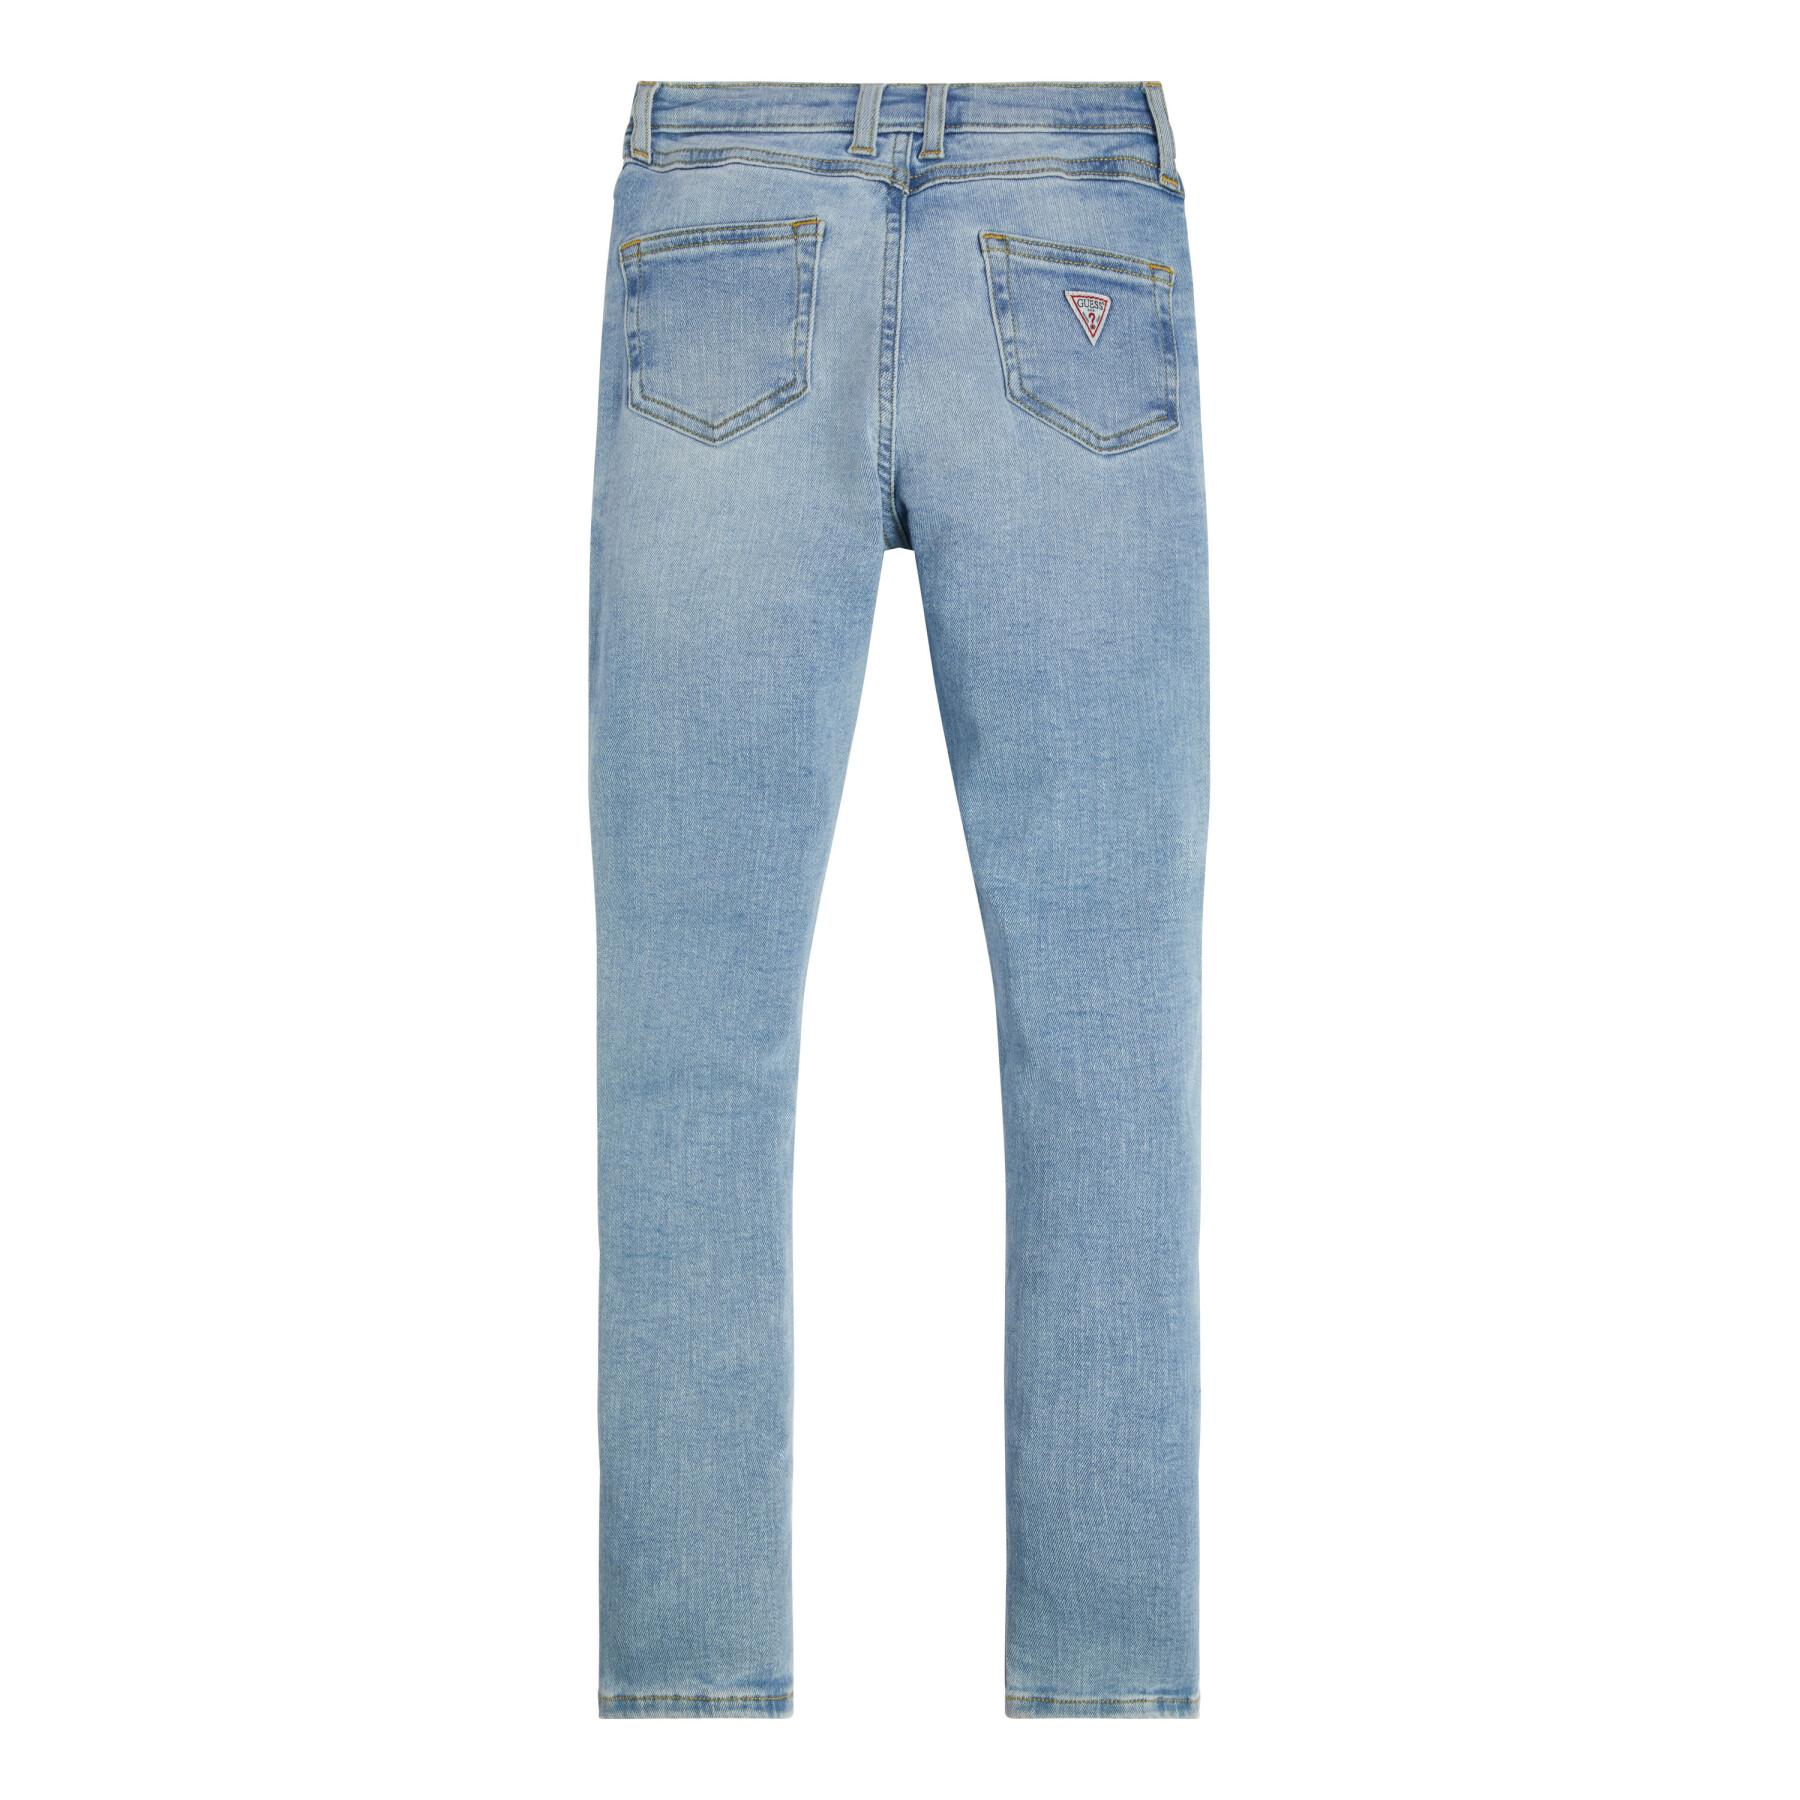 Jeans skinny fille Guess H.W